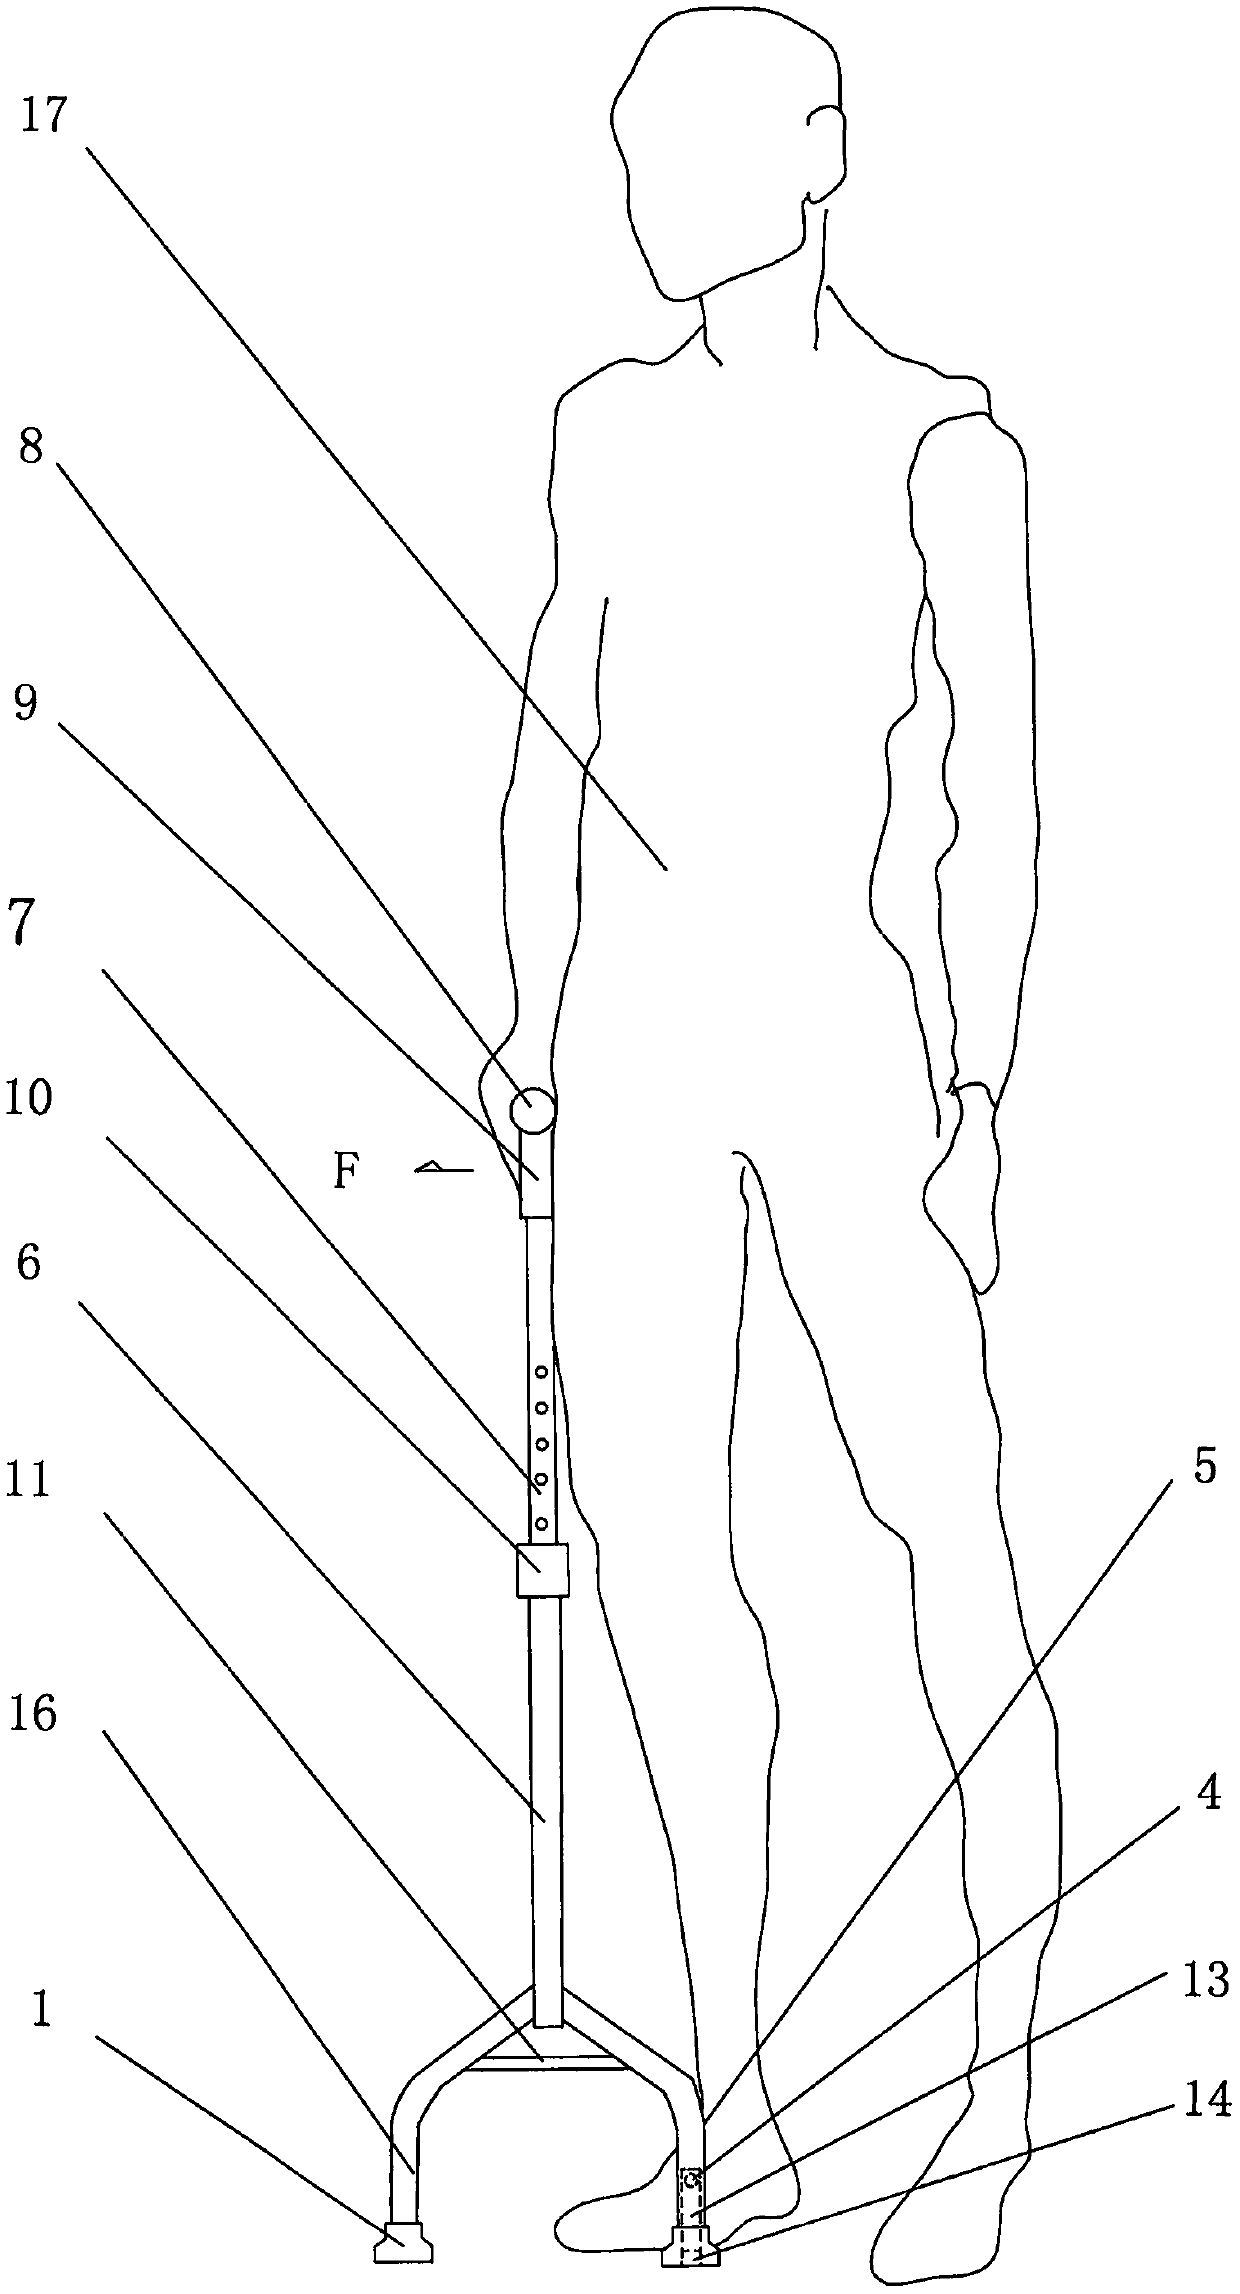 Method for using four-leg walking stick safer and more labor-saving